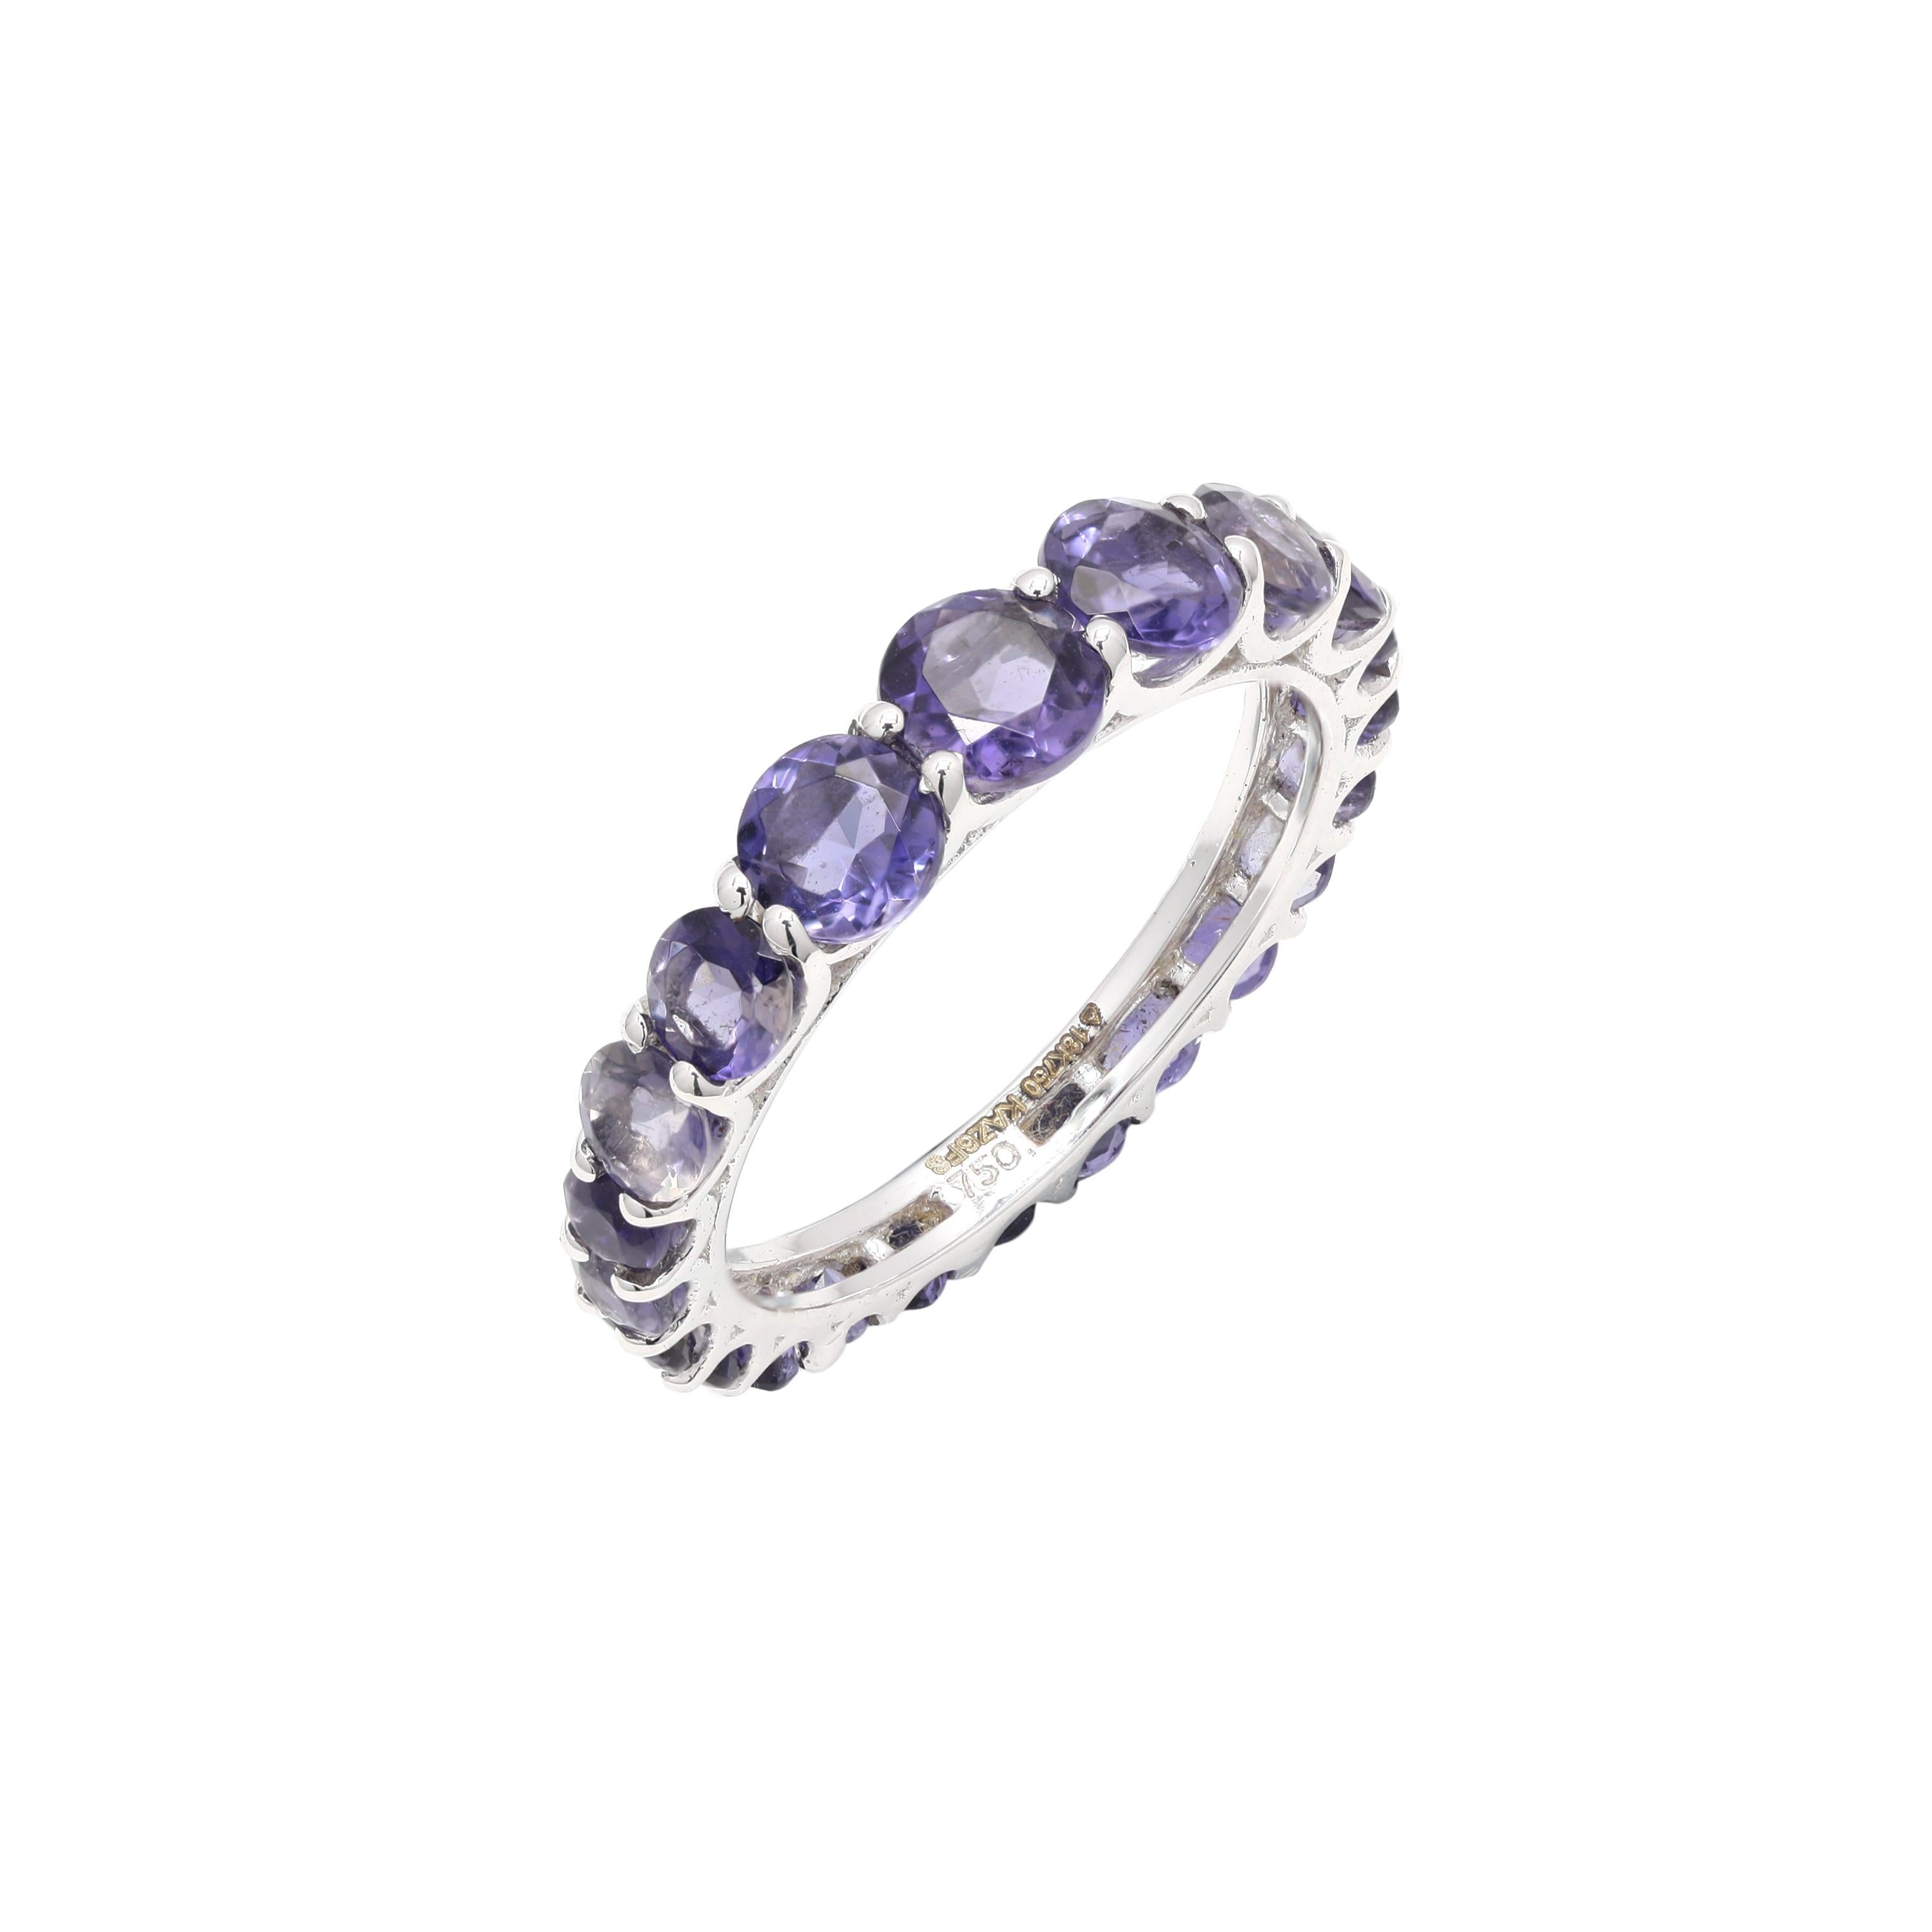 For Sale:  Stackable Eternity 2.27ct Iolite Gemstone Band Ring in 18k White Gold Settings 4